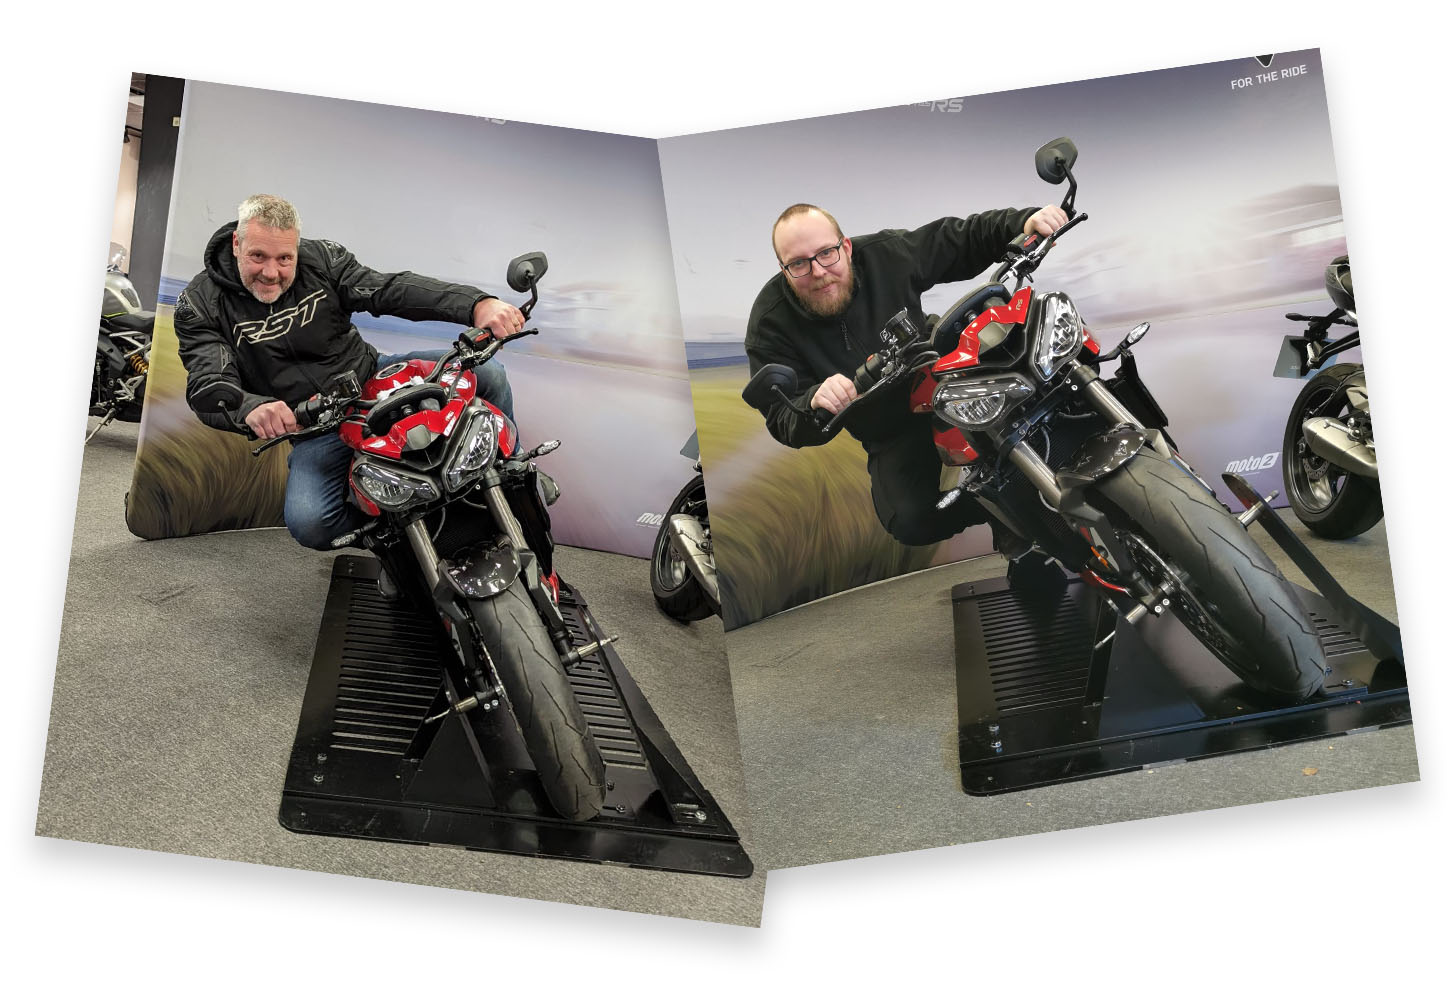 When the Street Triple 765 stopped by at Laguna Triumph in Ashford and Maidstone